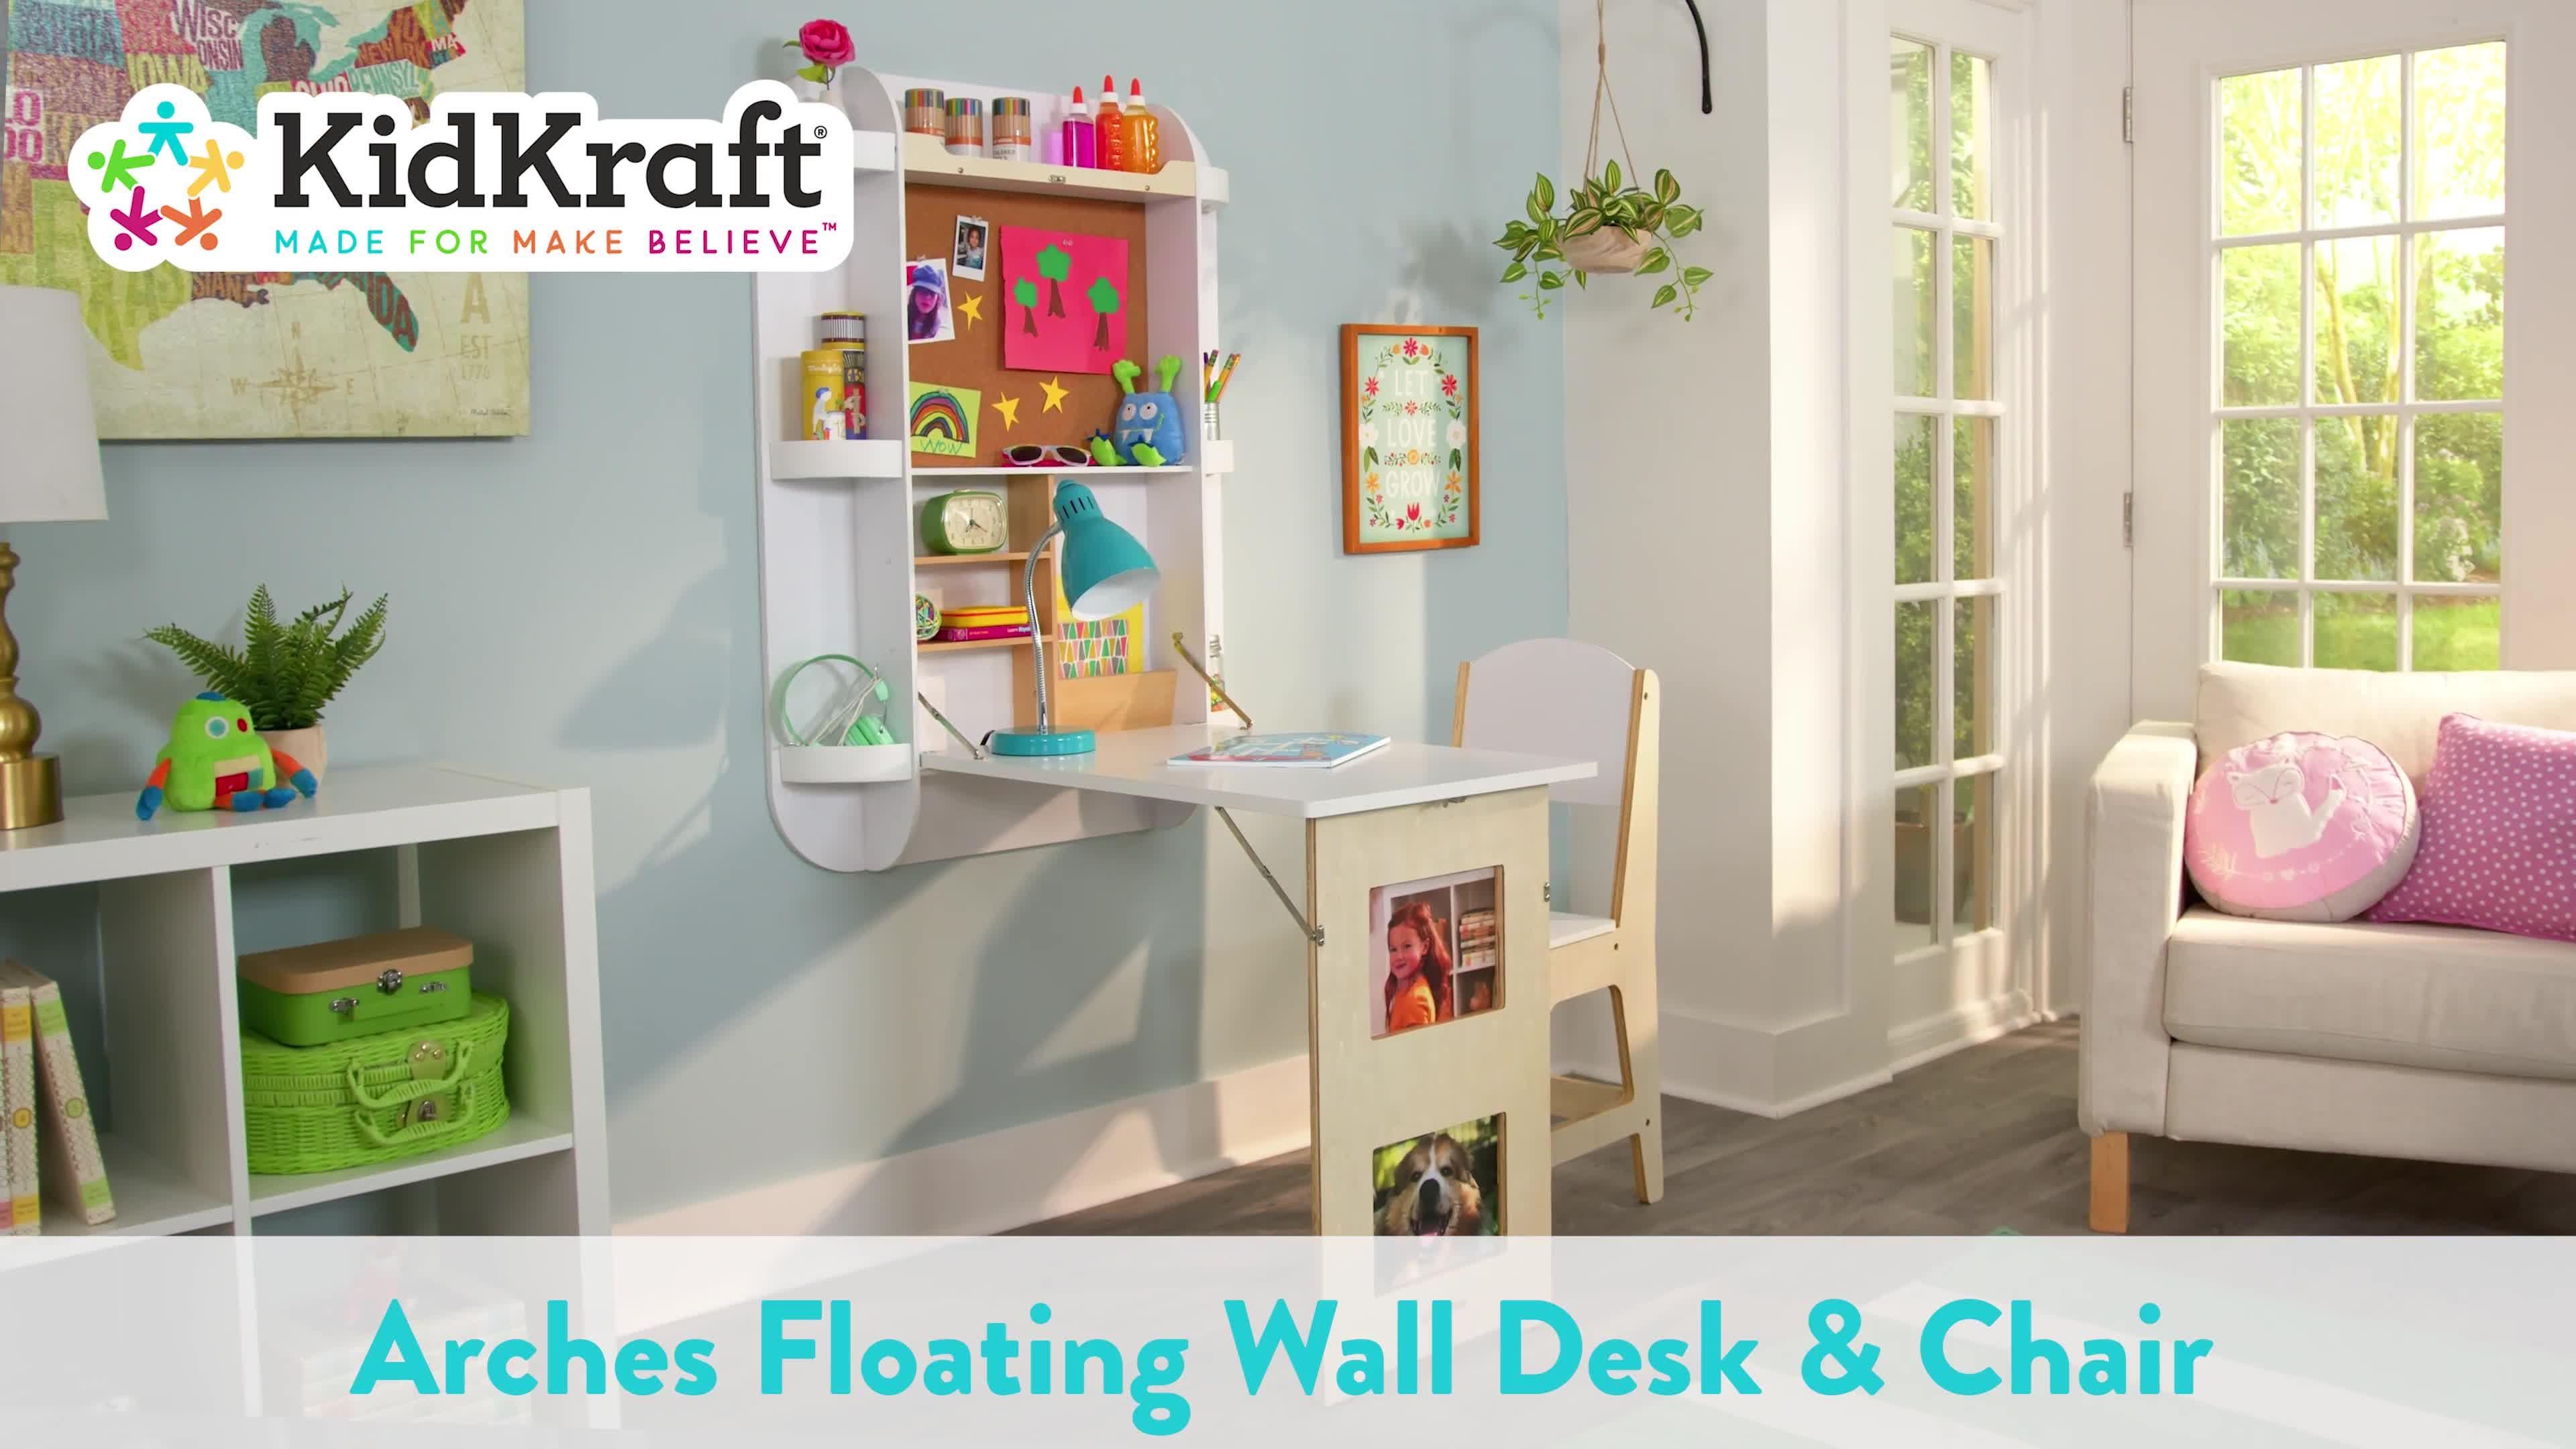 KidKraft Arches Floating Wall Desk & Chair & Reviews